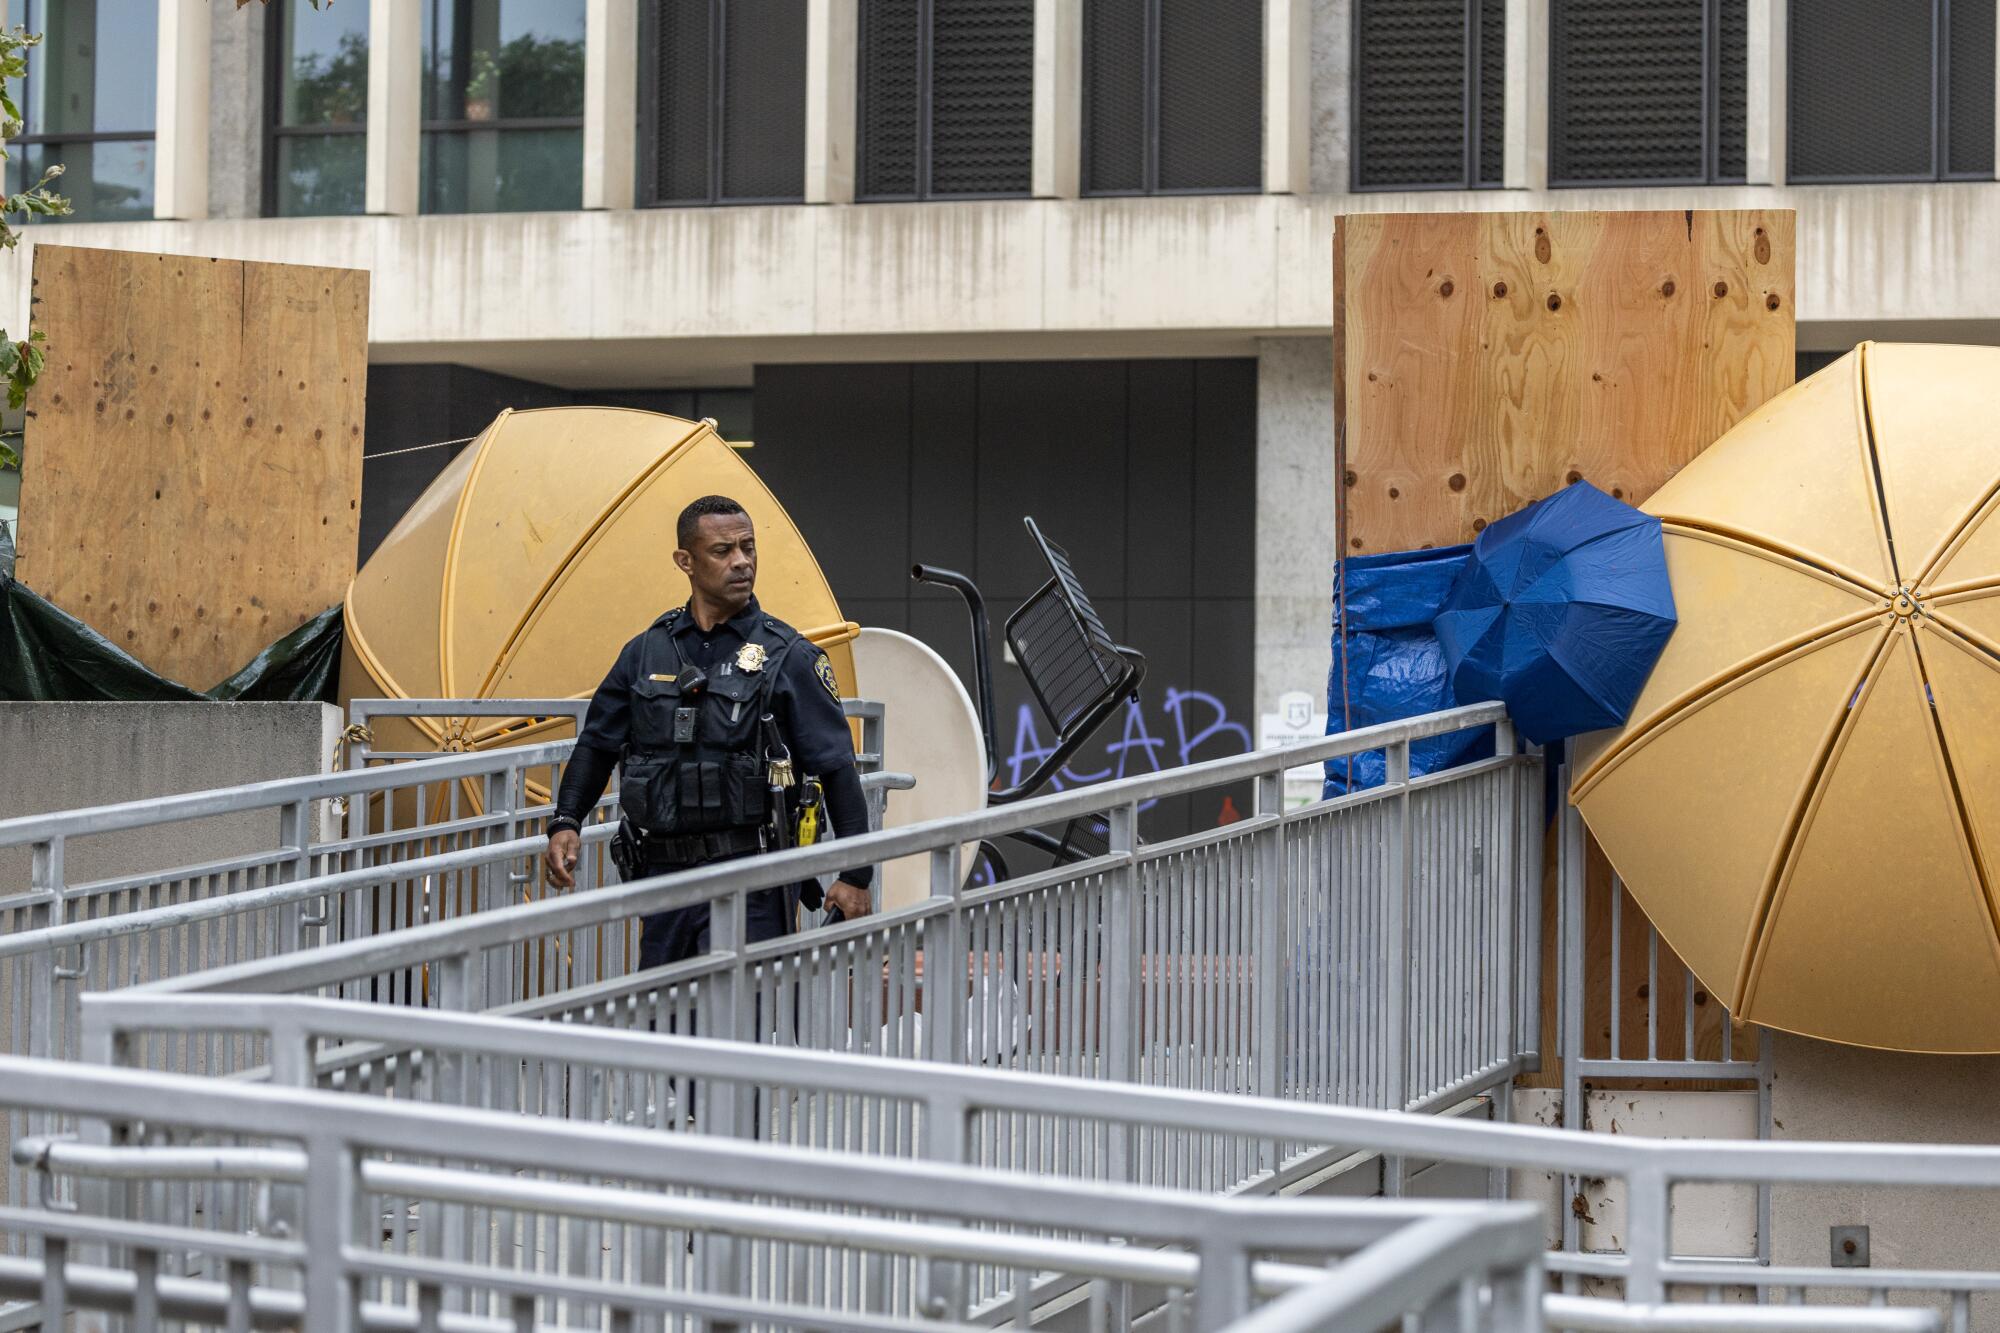 A police officer walks past an opening in barricades surrounding the student services building at Cal State L.A.